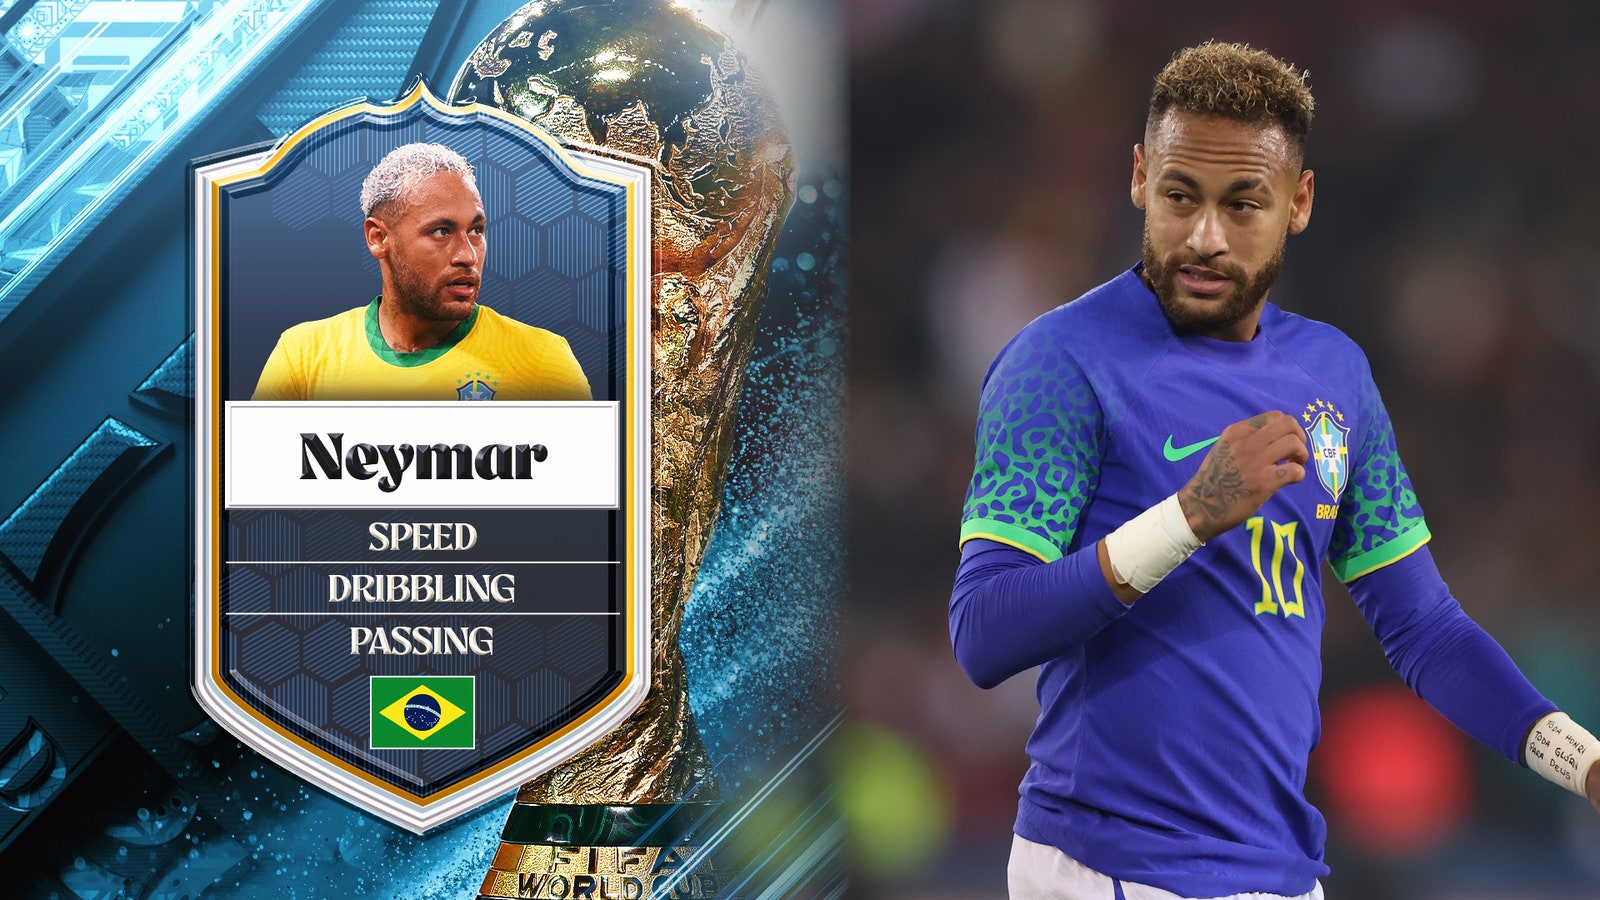 What makes Neymar special